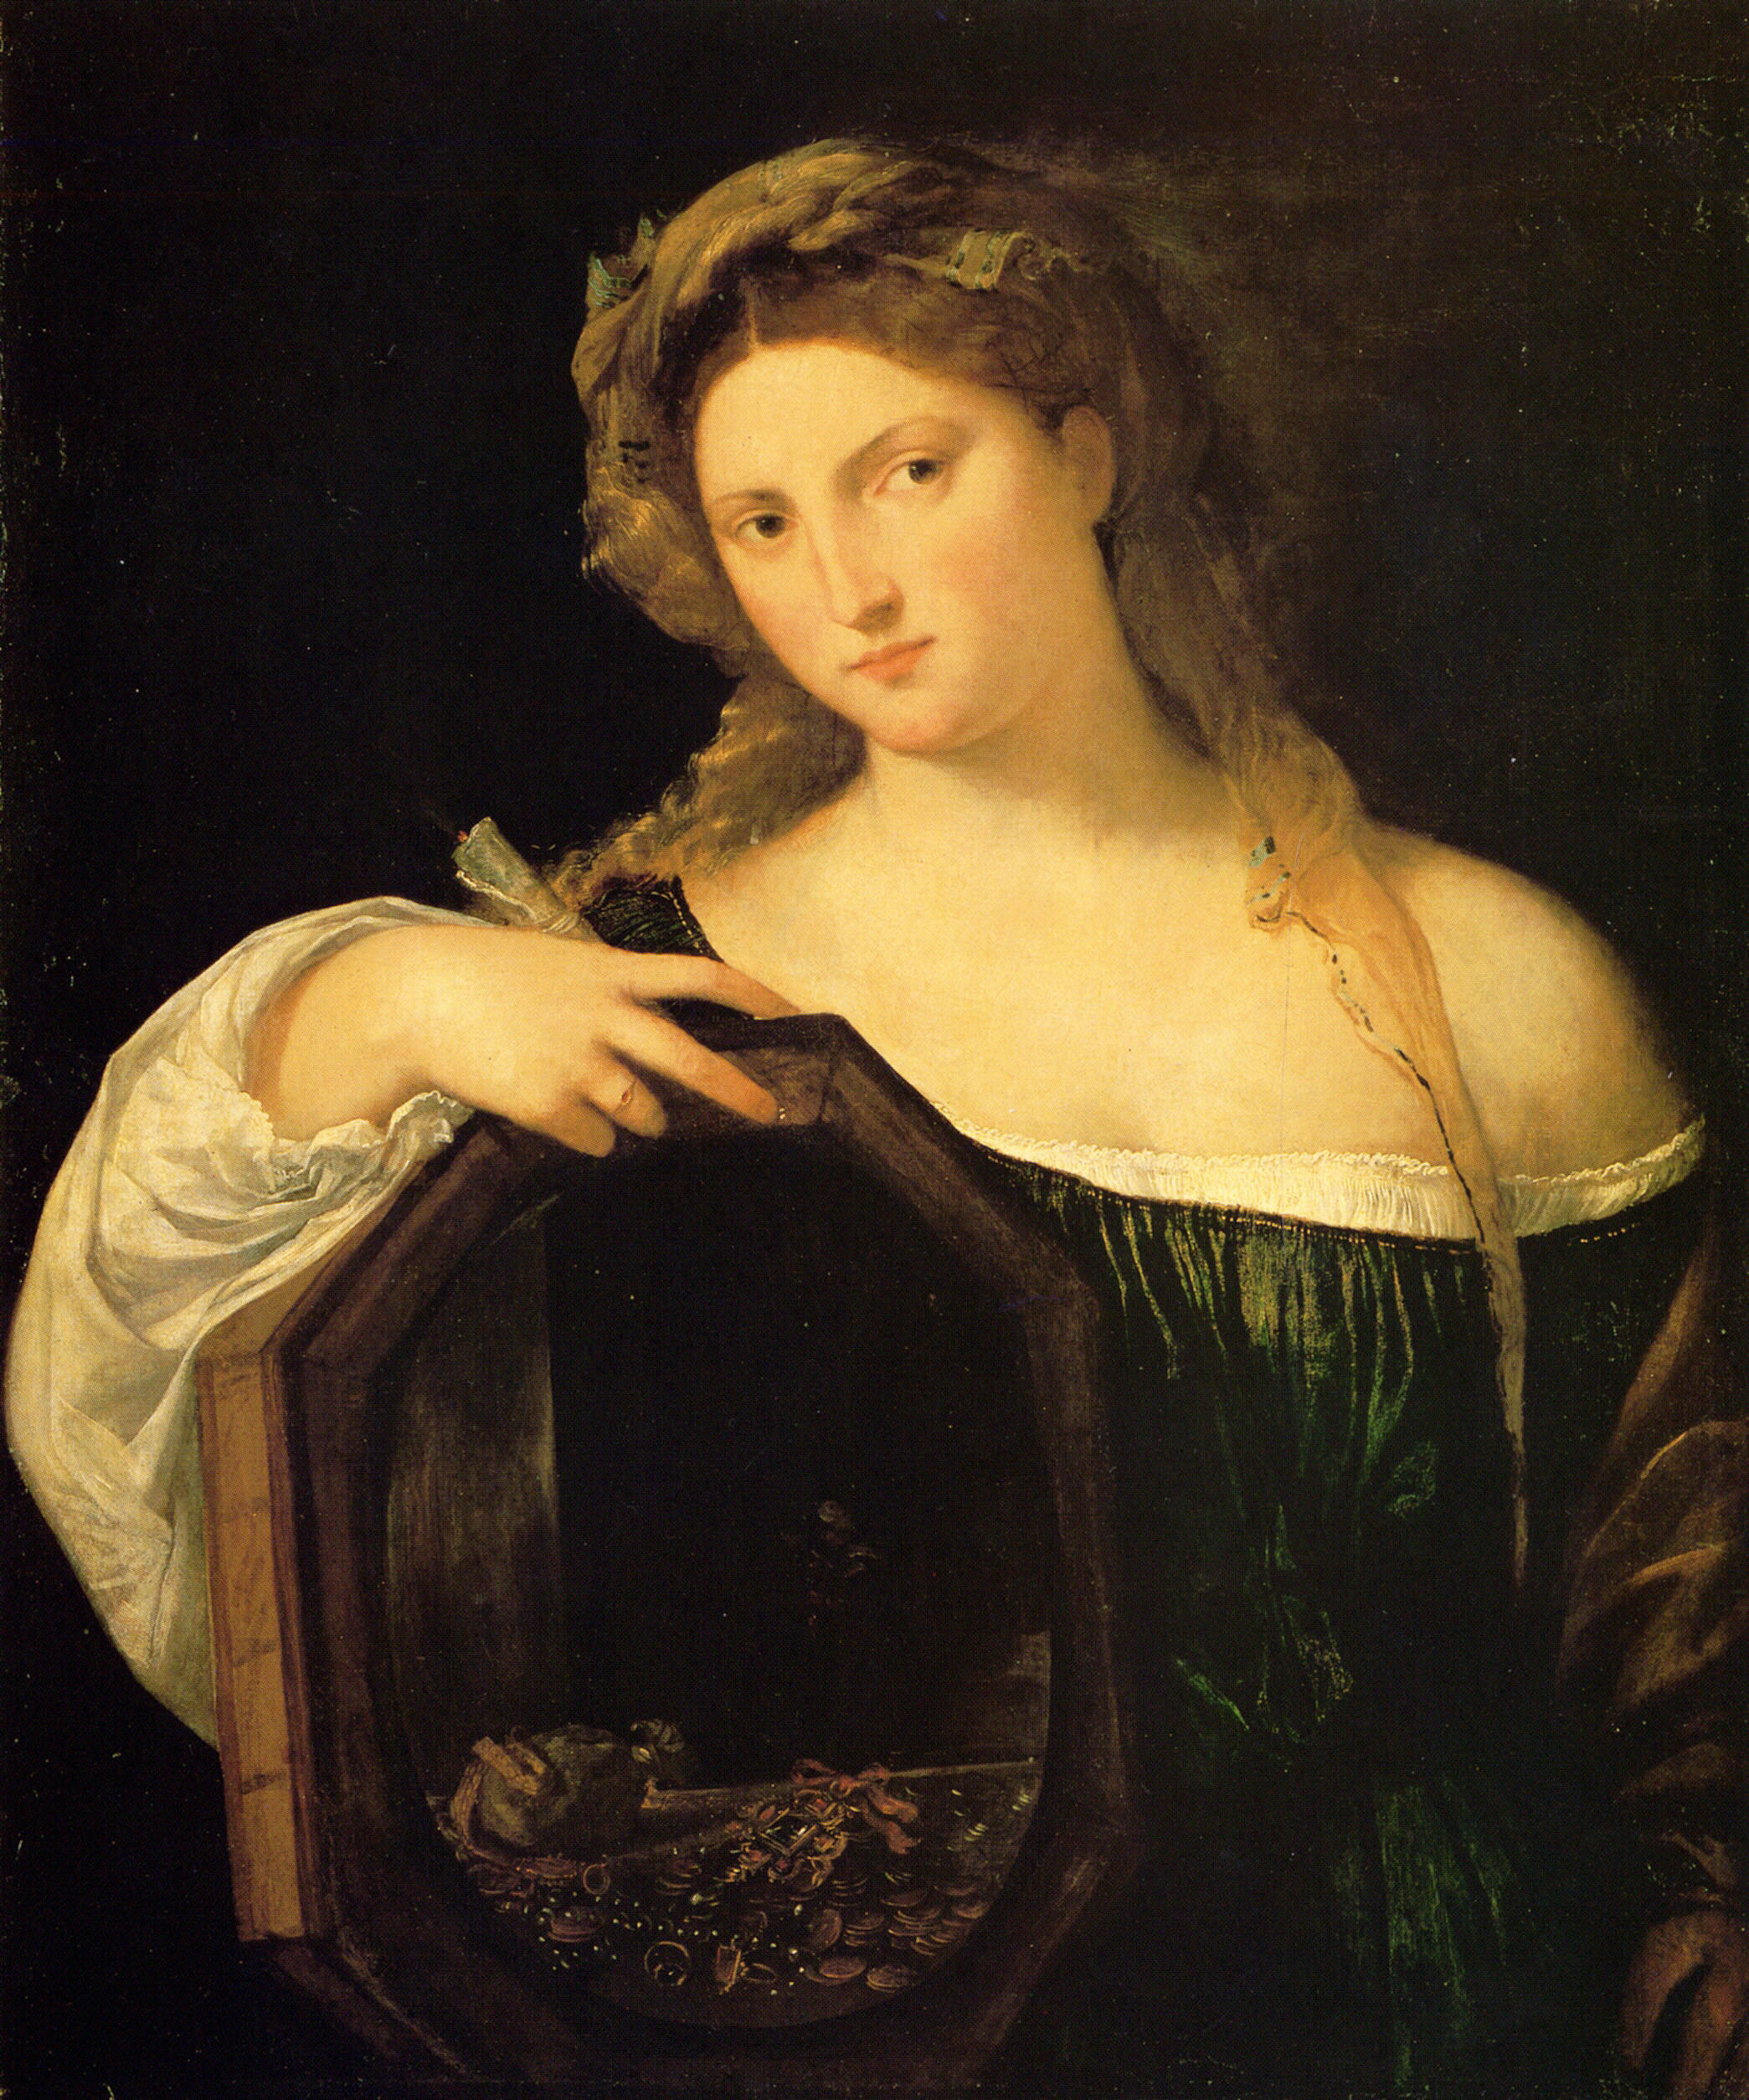 Amor Profano by  Titian - 1515 - 65 x 51 cm Kunsthistorisches Museum